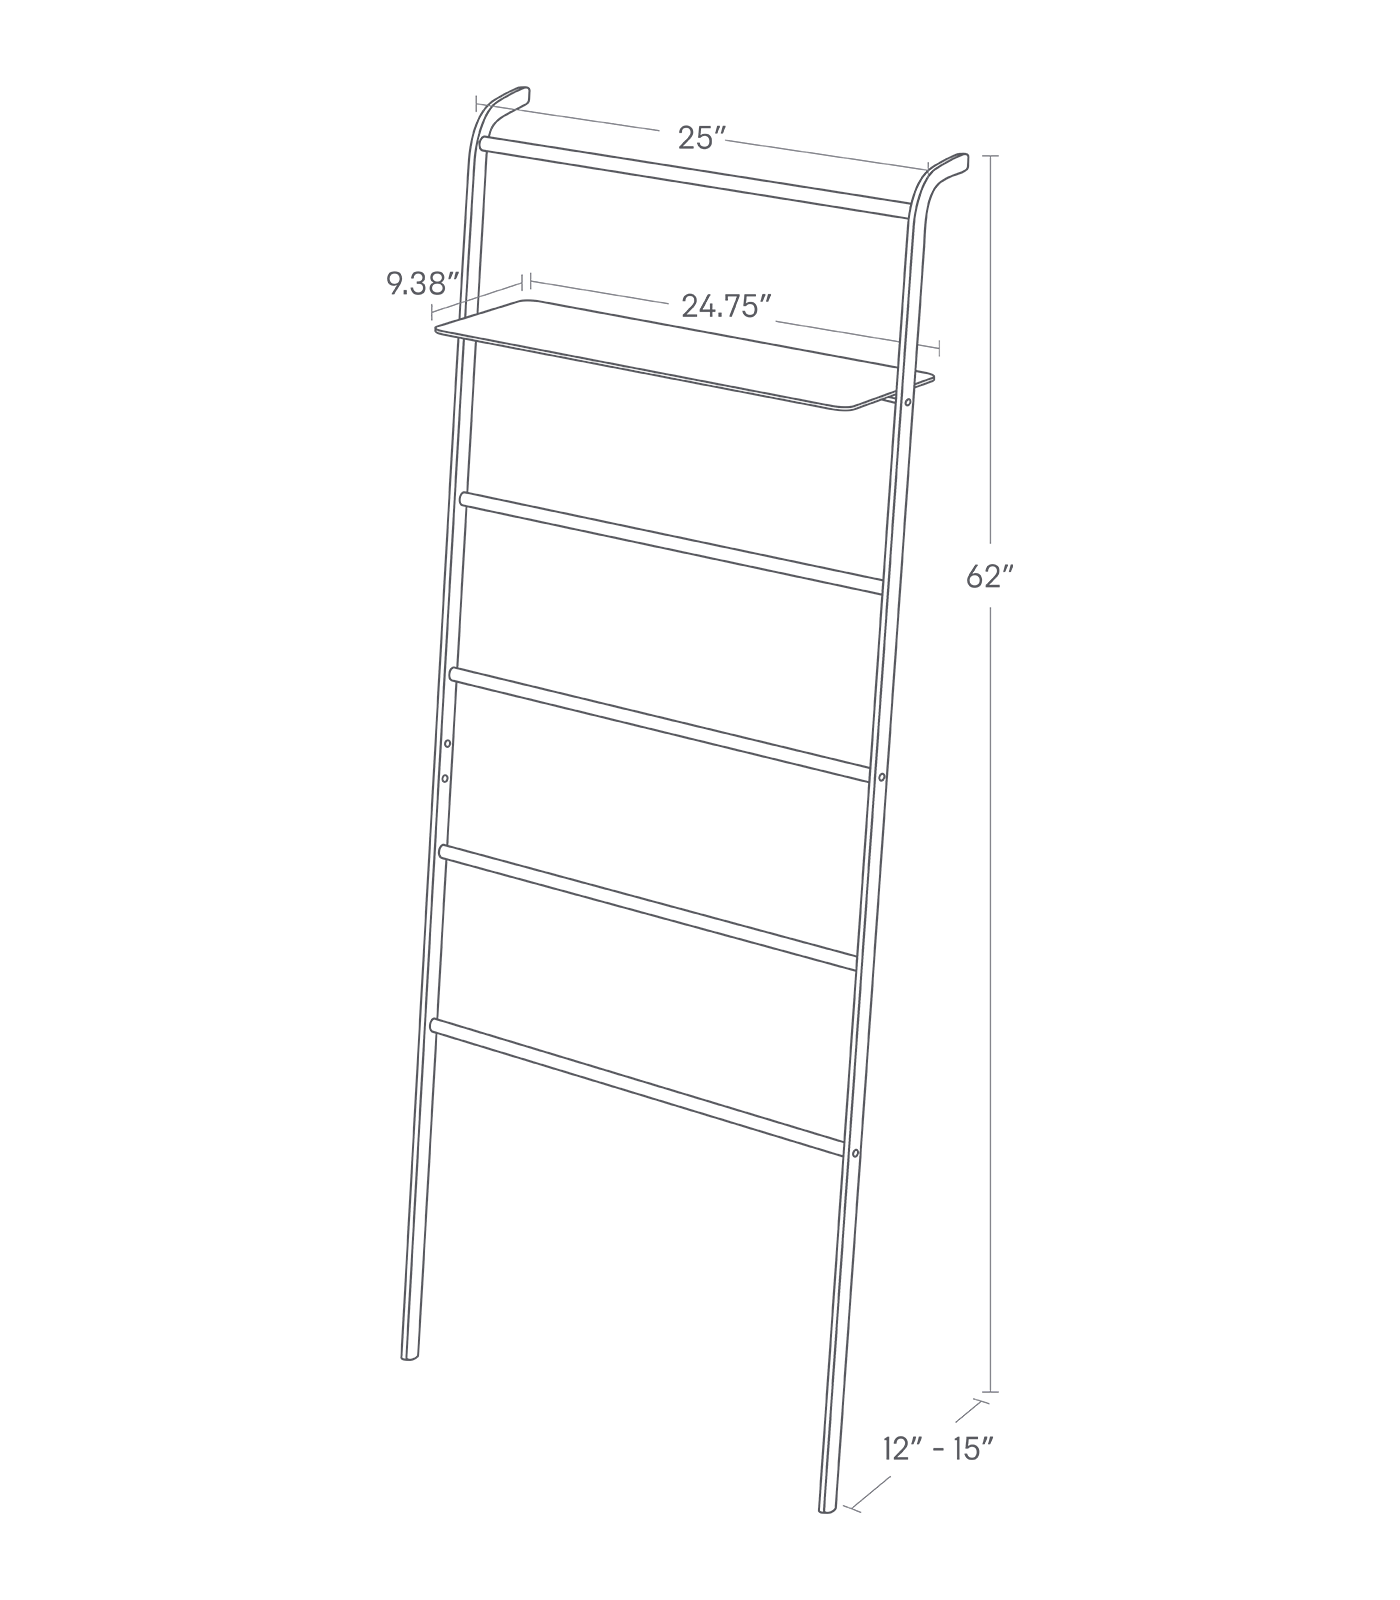 Dimension image for Leaning Storage Ladder showing length of 24.75